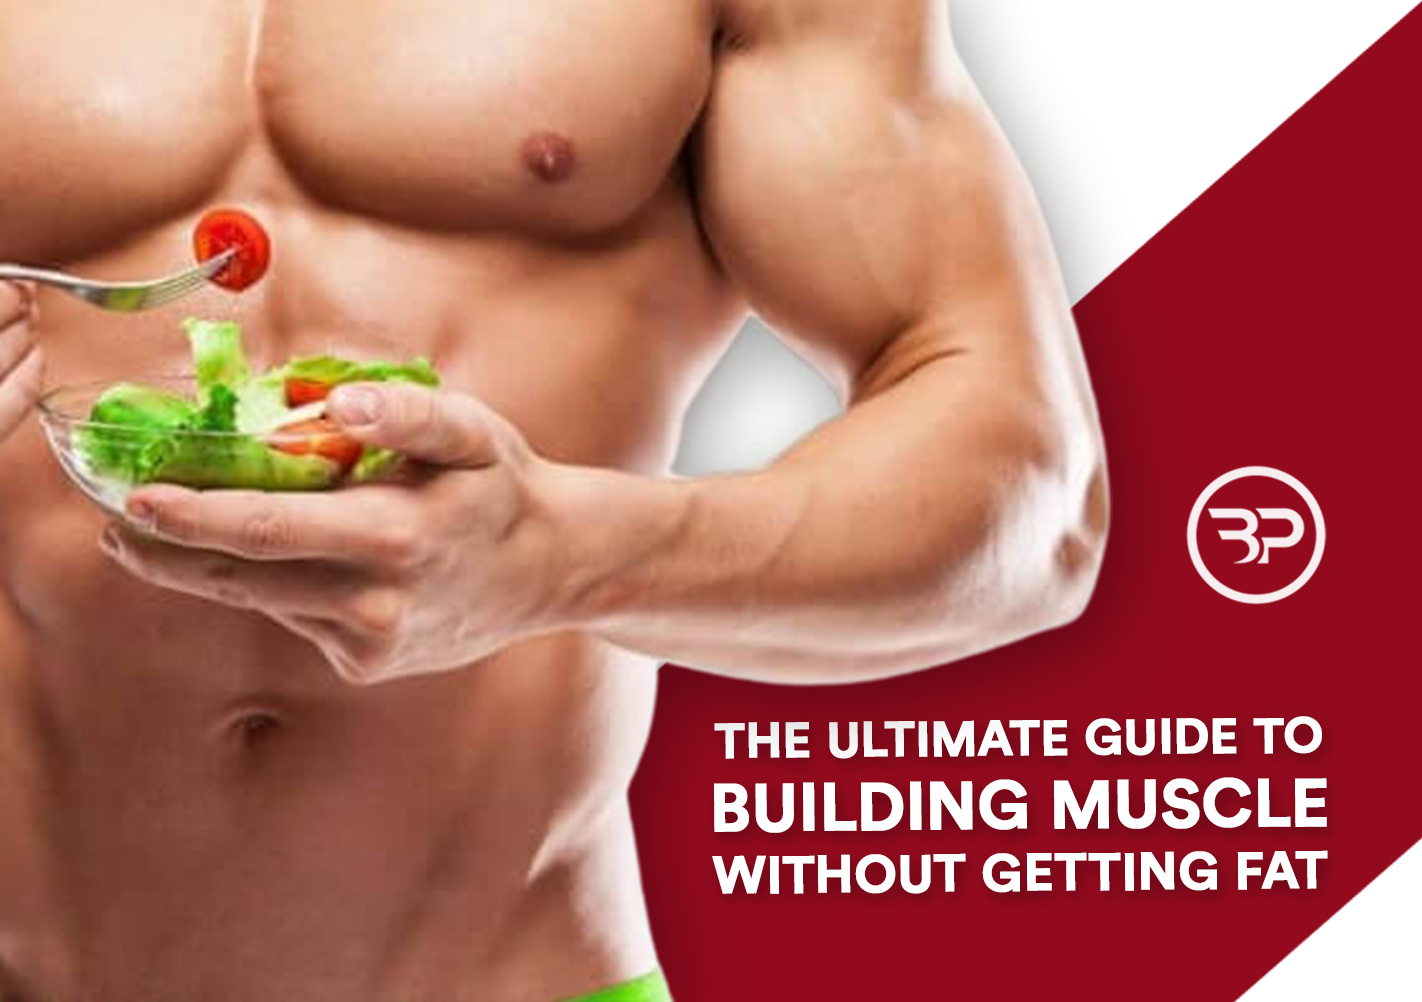 Lean Bulking: A Complete Guide to Building Muscle Without Gaining Fat